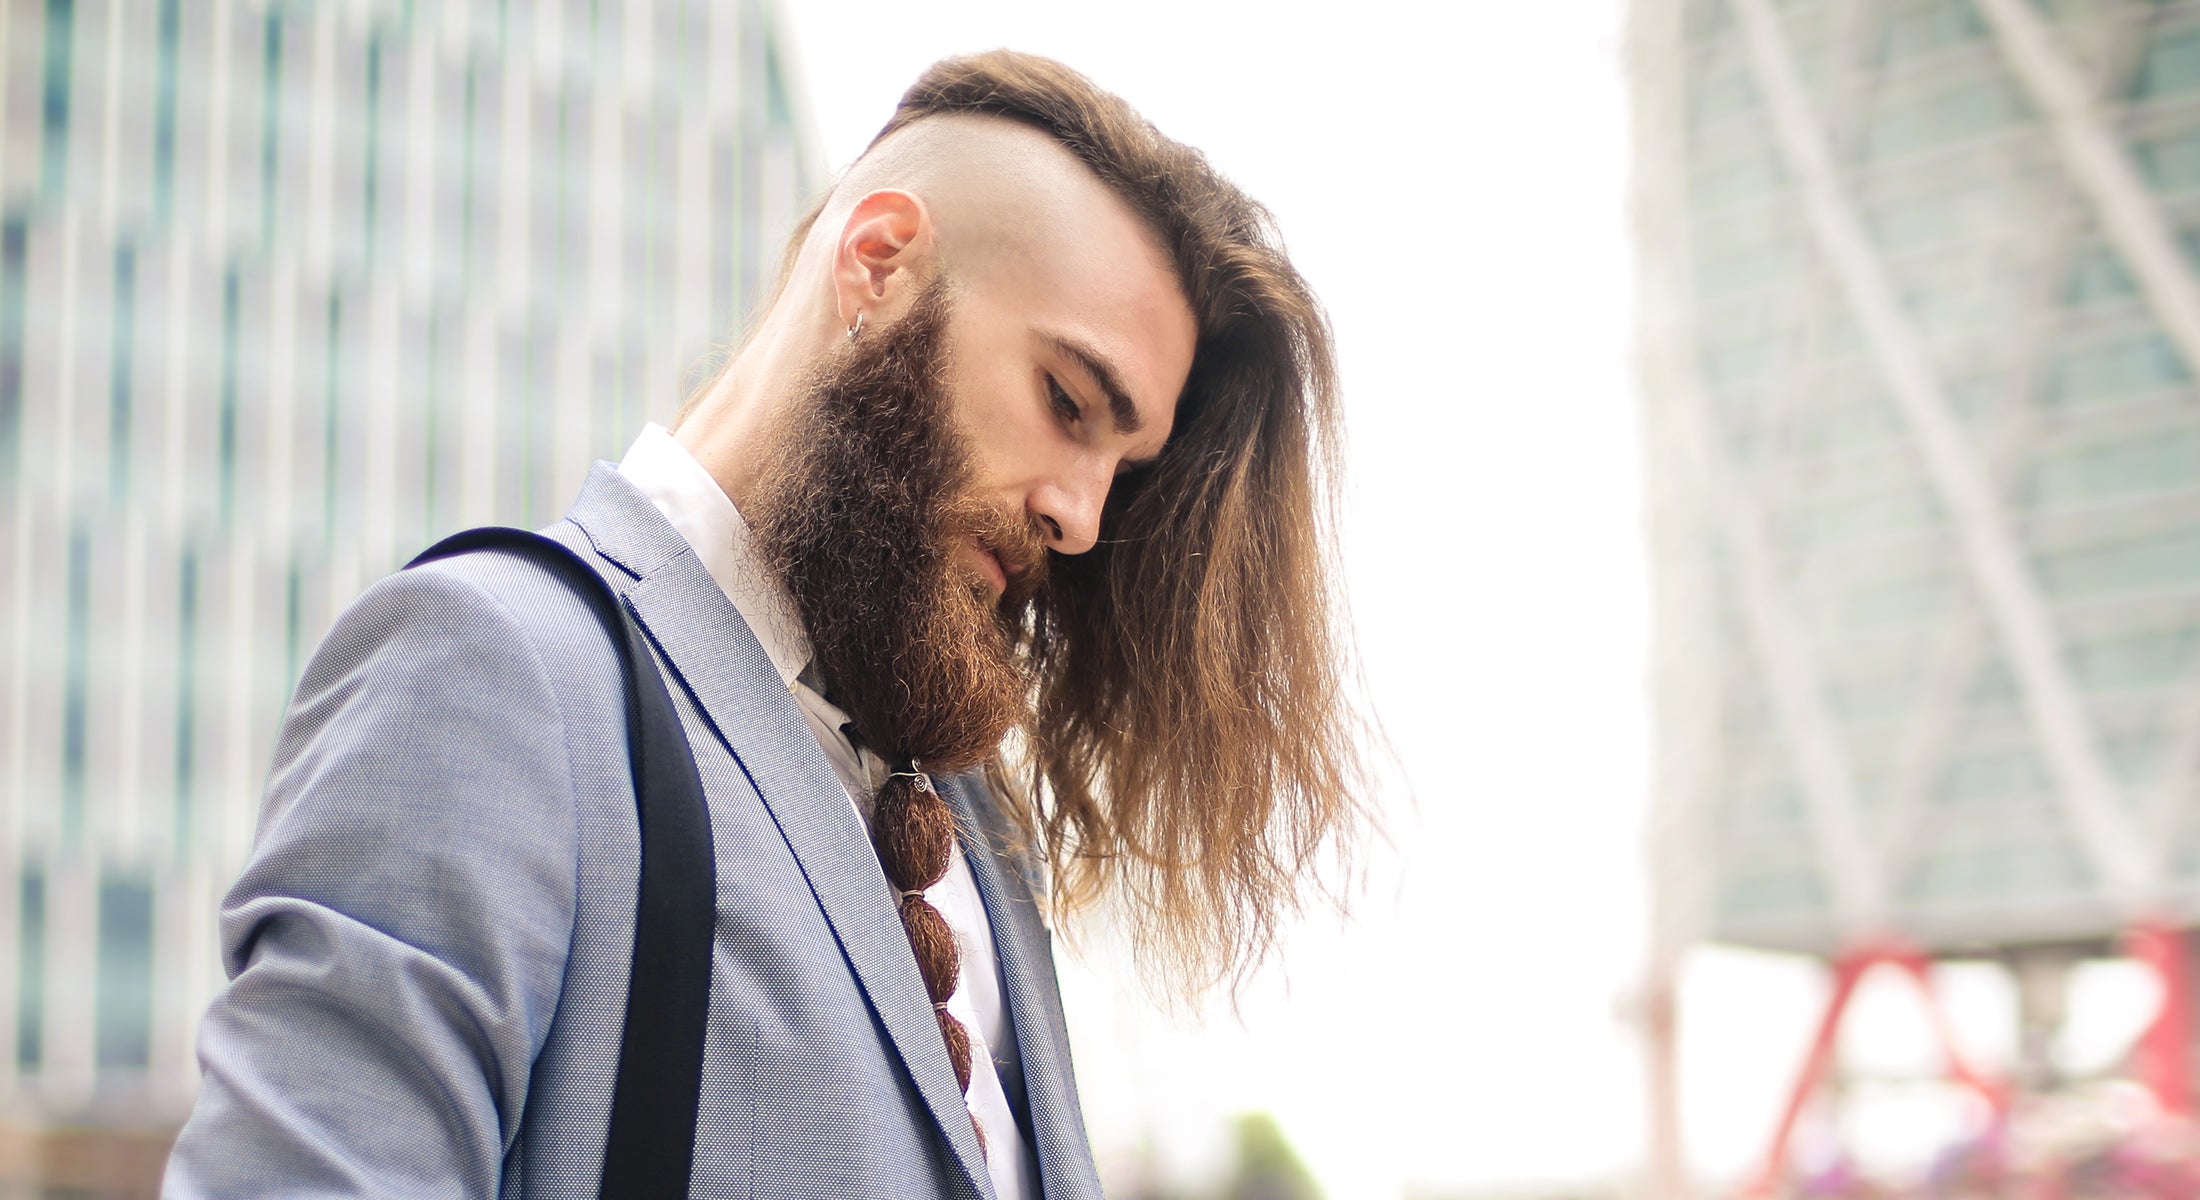 A Complete Guide to All Types of Men's Haircuts - Haircut Names